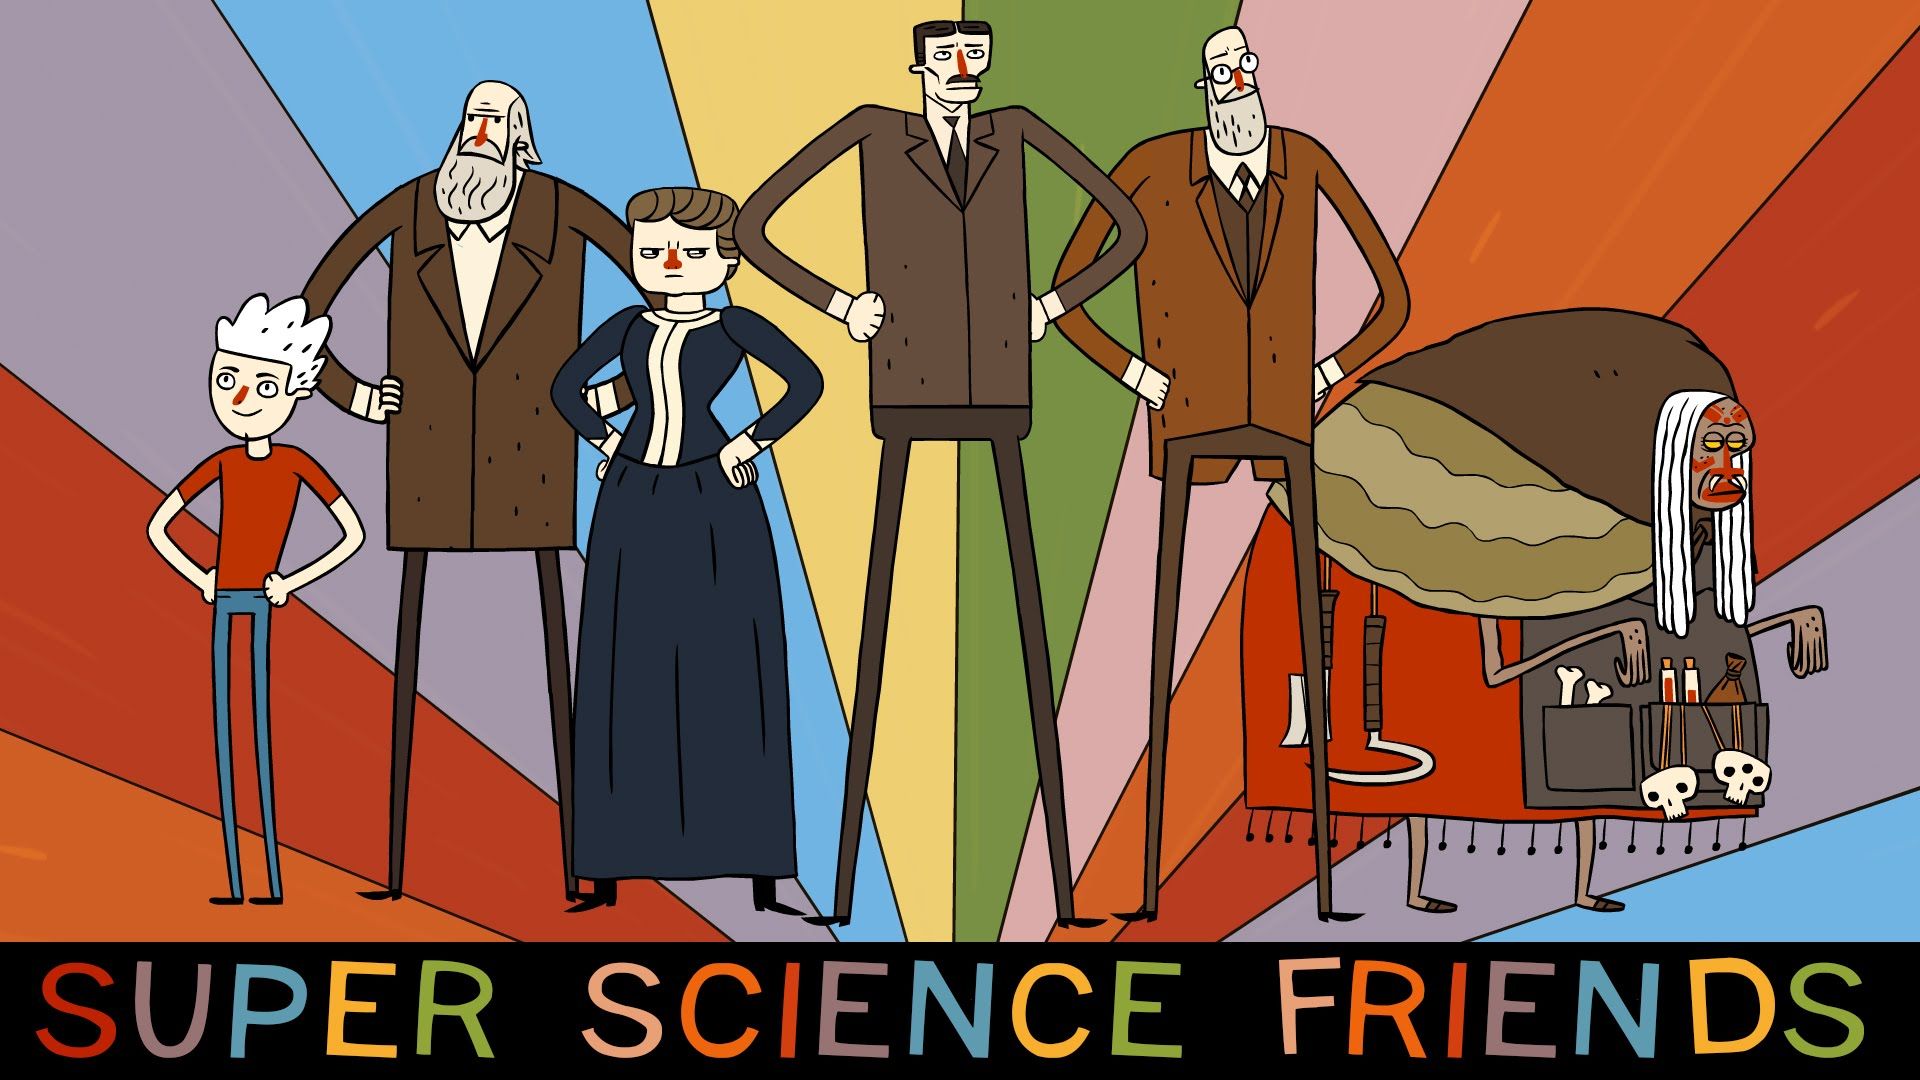 Science is always better if you work together